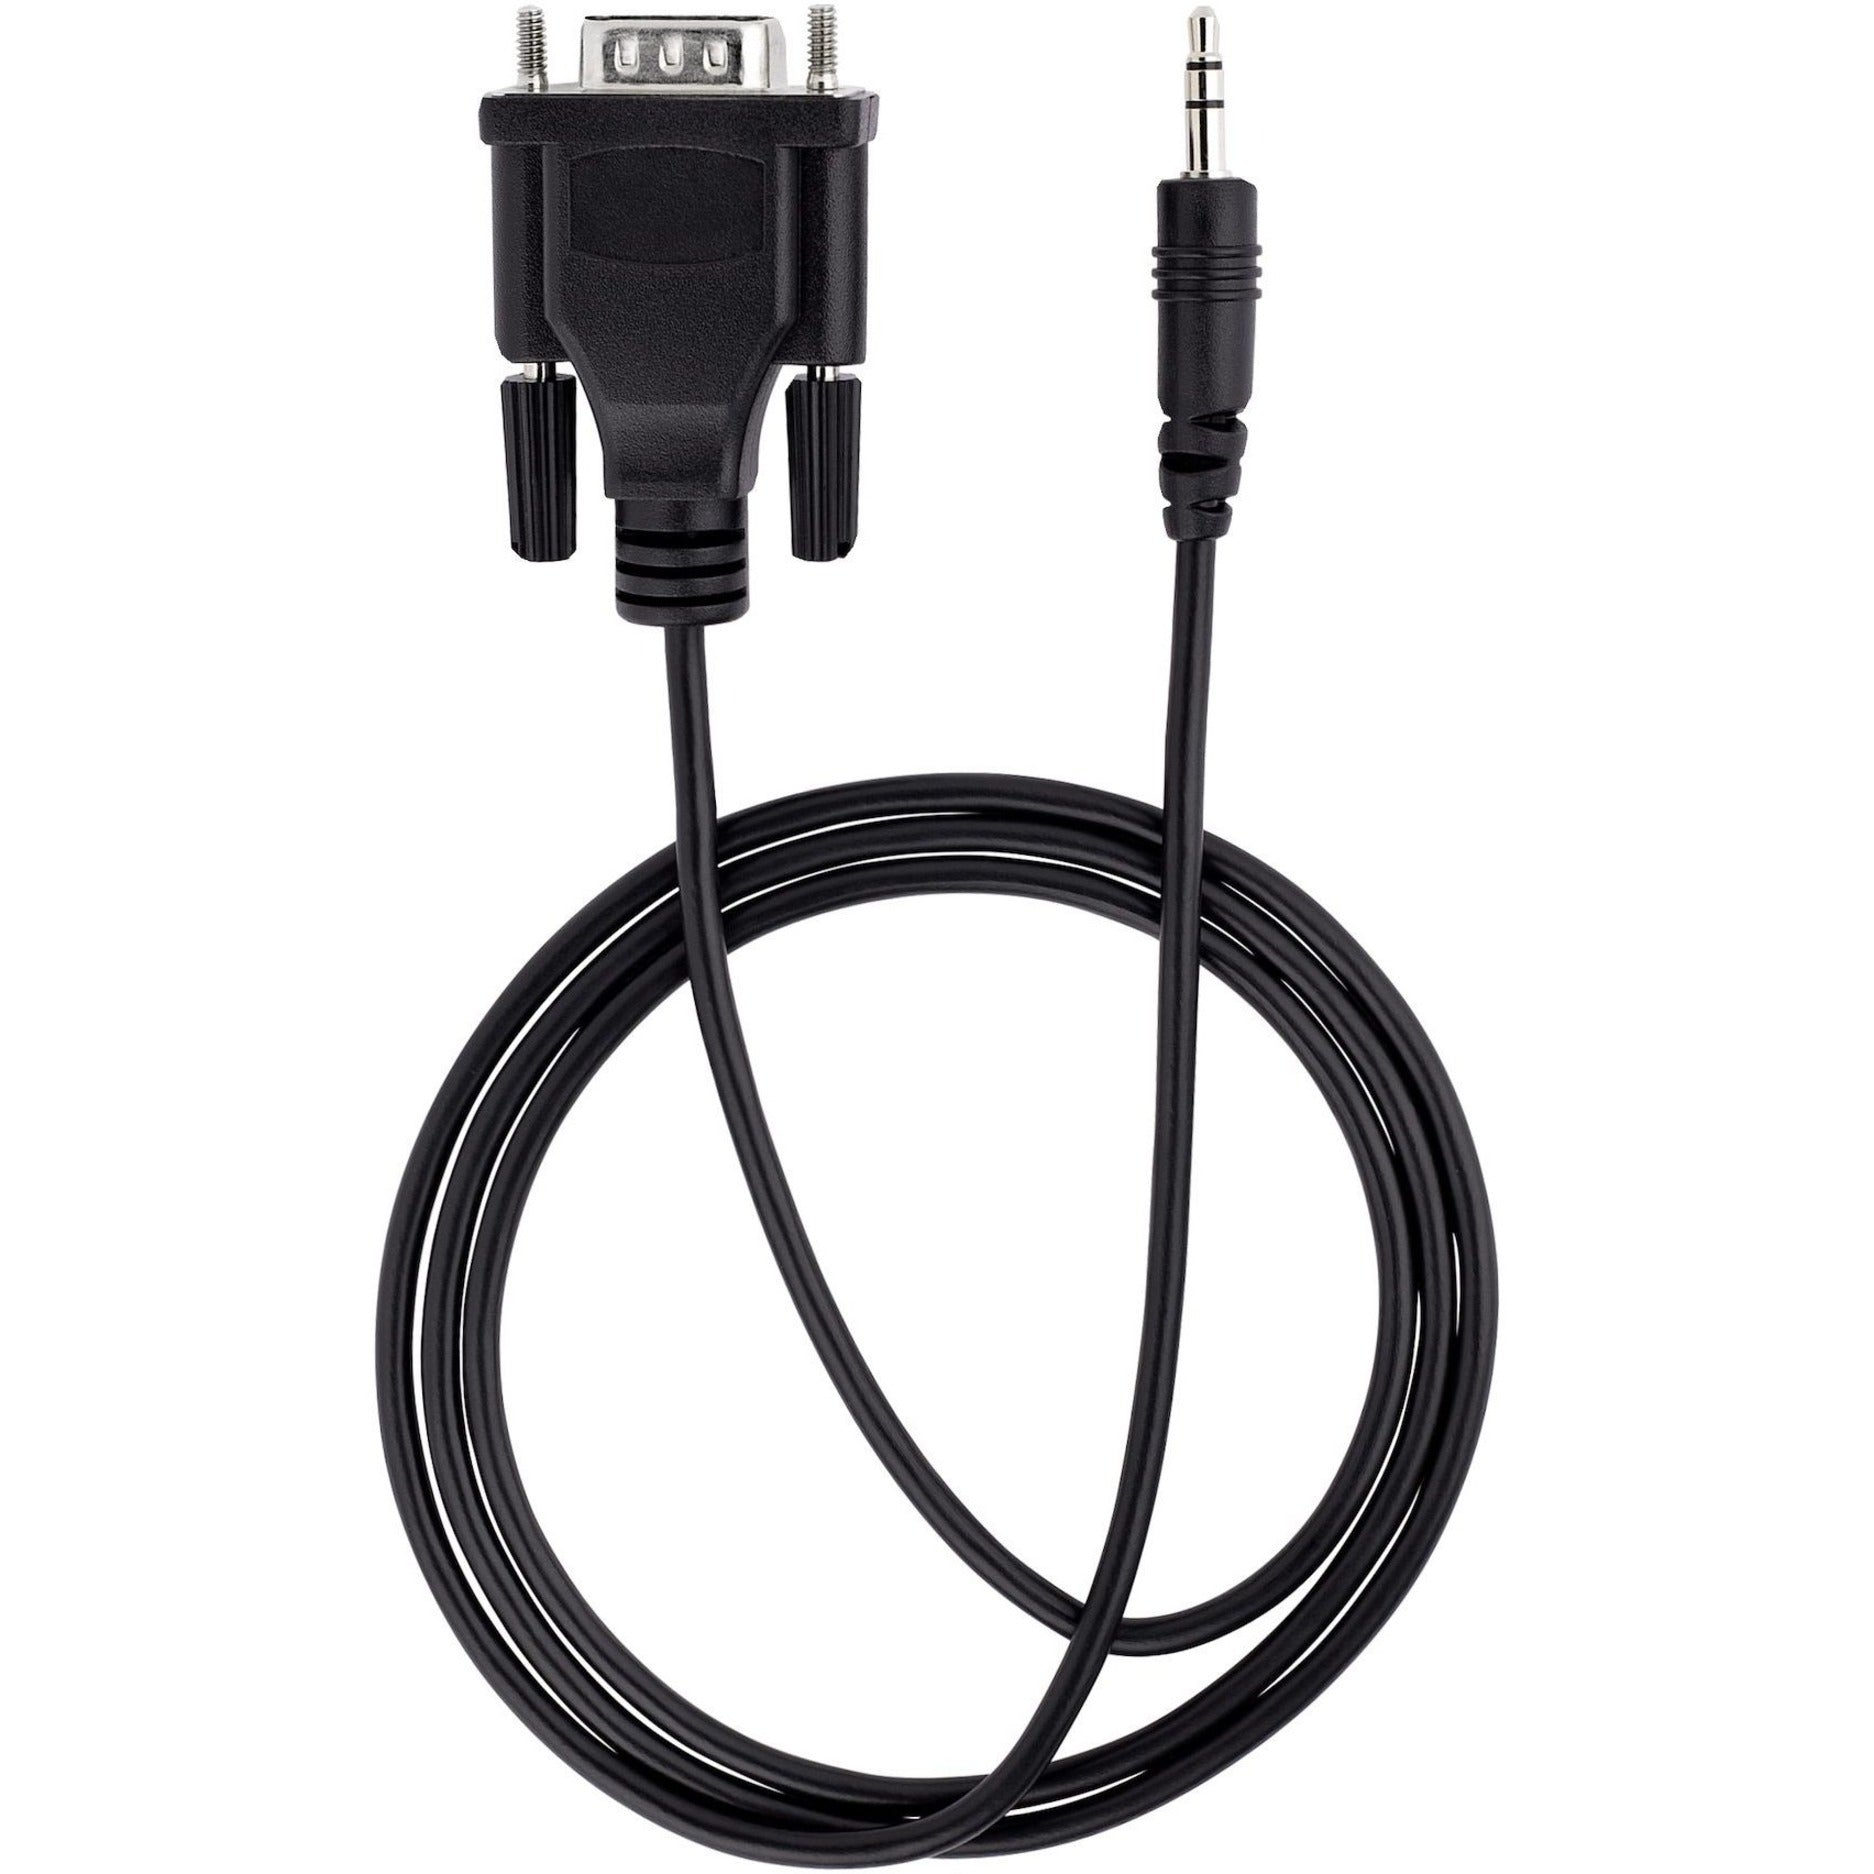 StarTech.com 9M351M-RS232-CABLE DB9 to 3.5mm RS232 Serial Cable, 3ft, for Serial Device Configuration